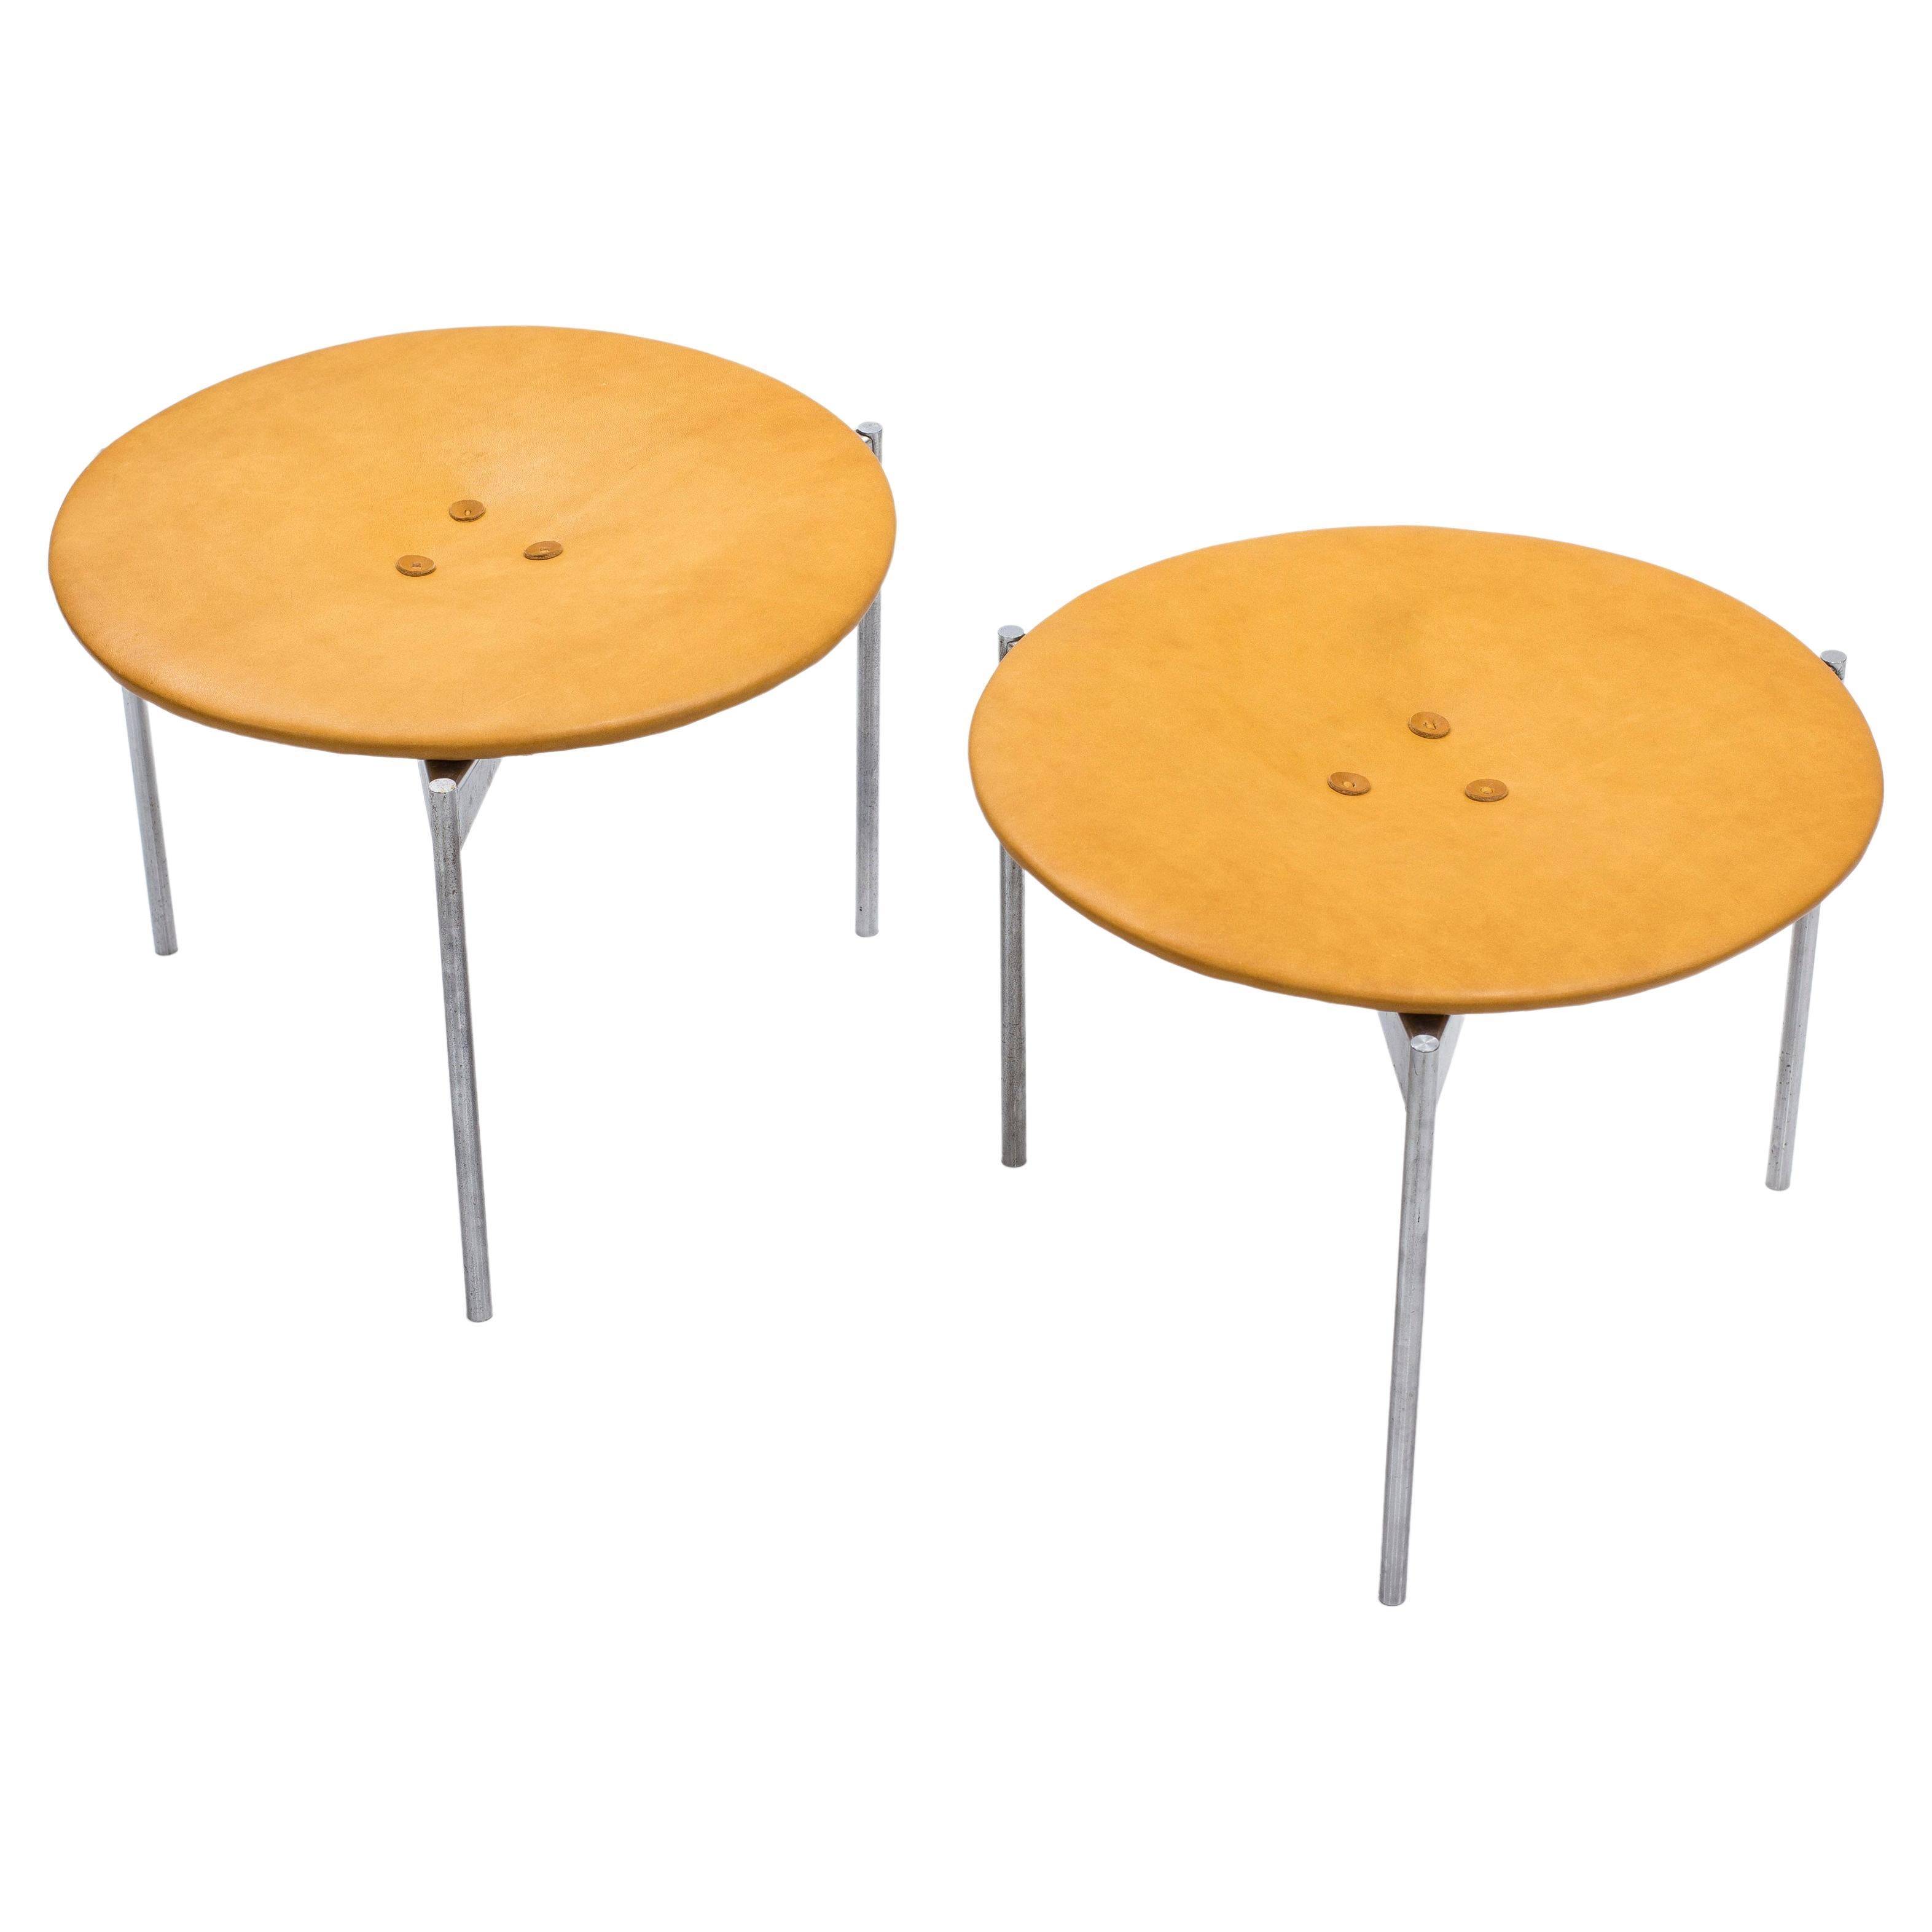 Leather and Steel Stools by Uno & Östen Kristiansson, Sweden, 1960s For Sale